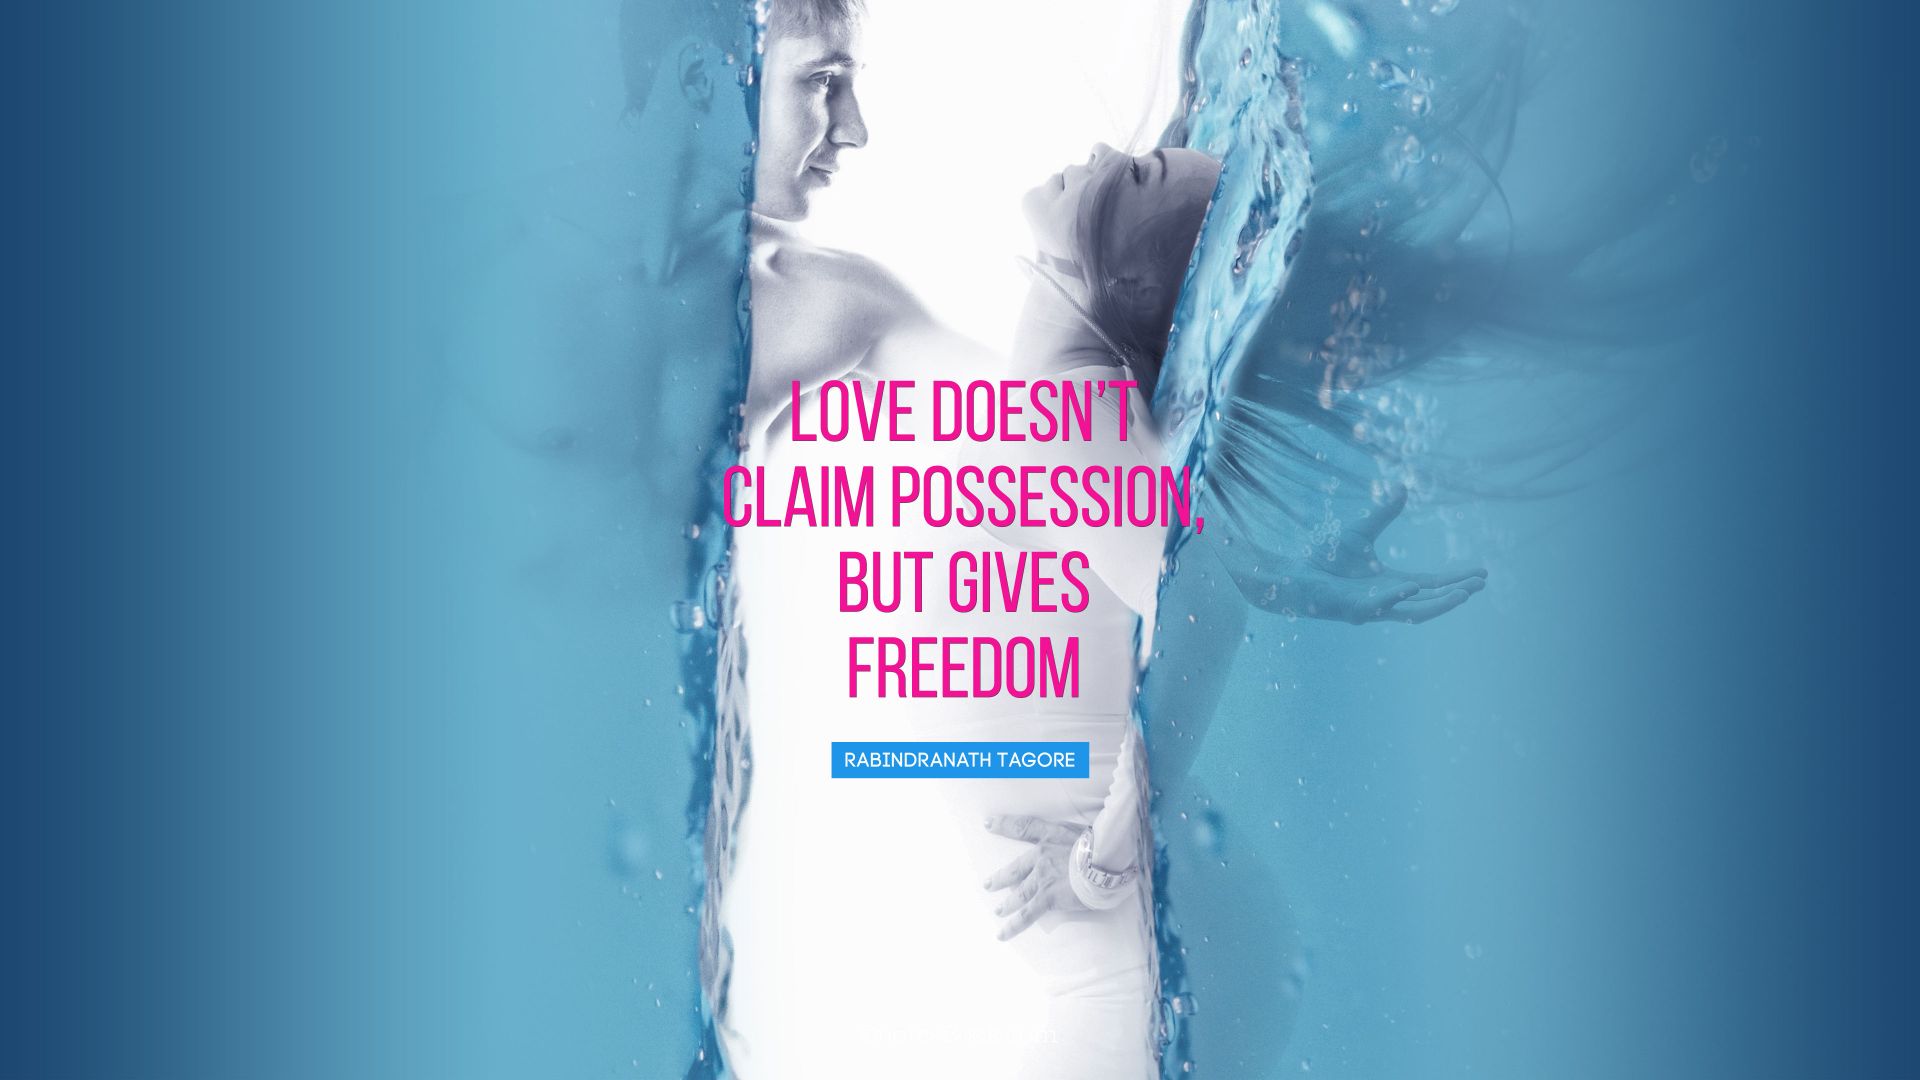 Love doesn’t claim possession, but gives 
freedom. - Quote by Rabindranath Tagore